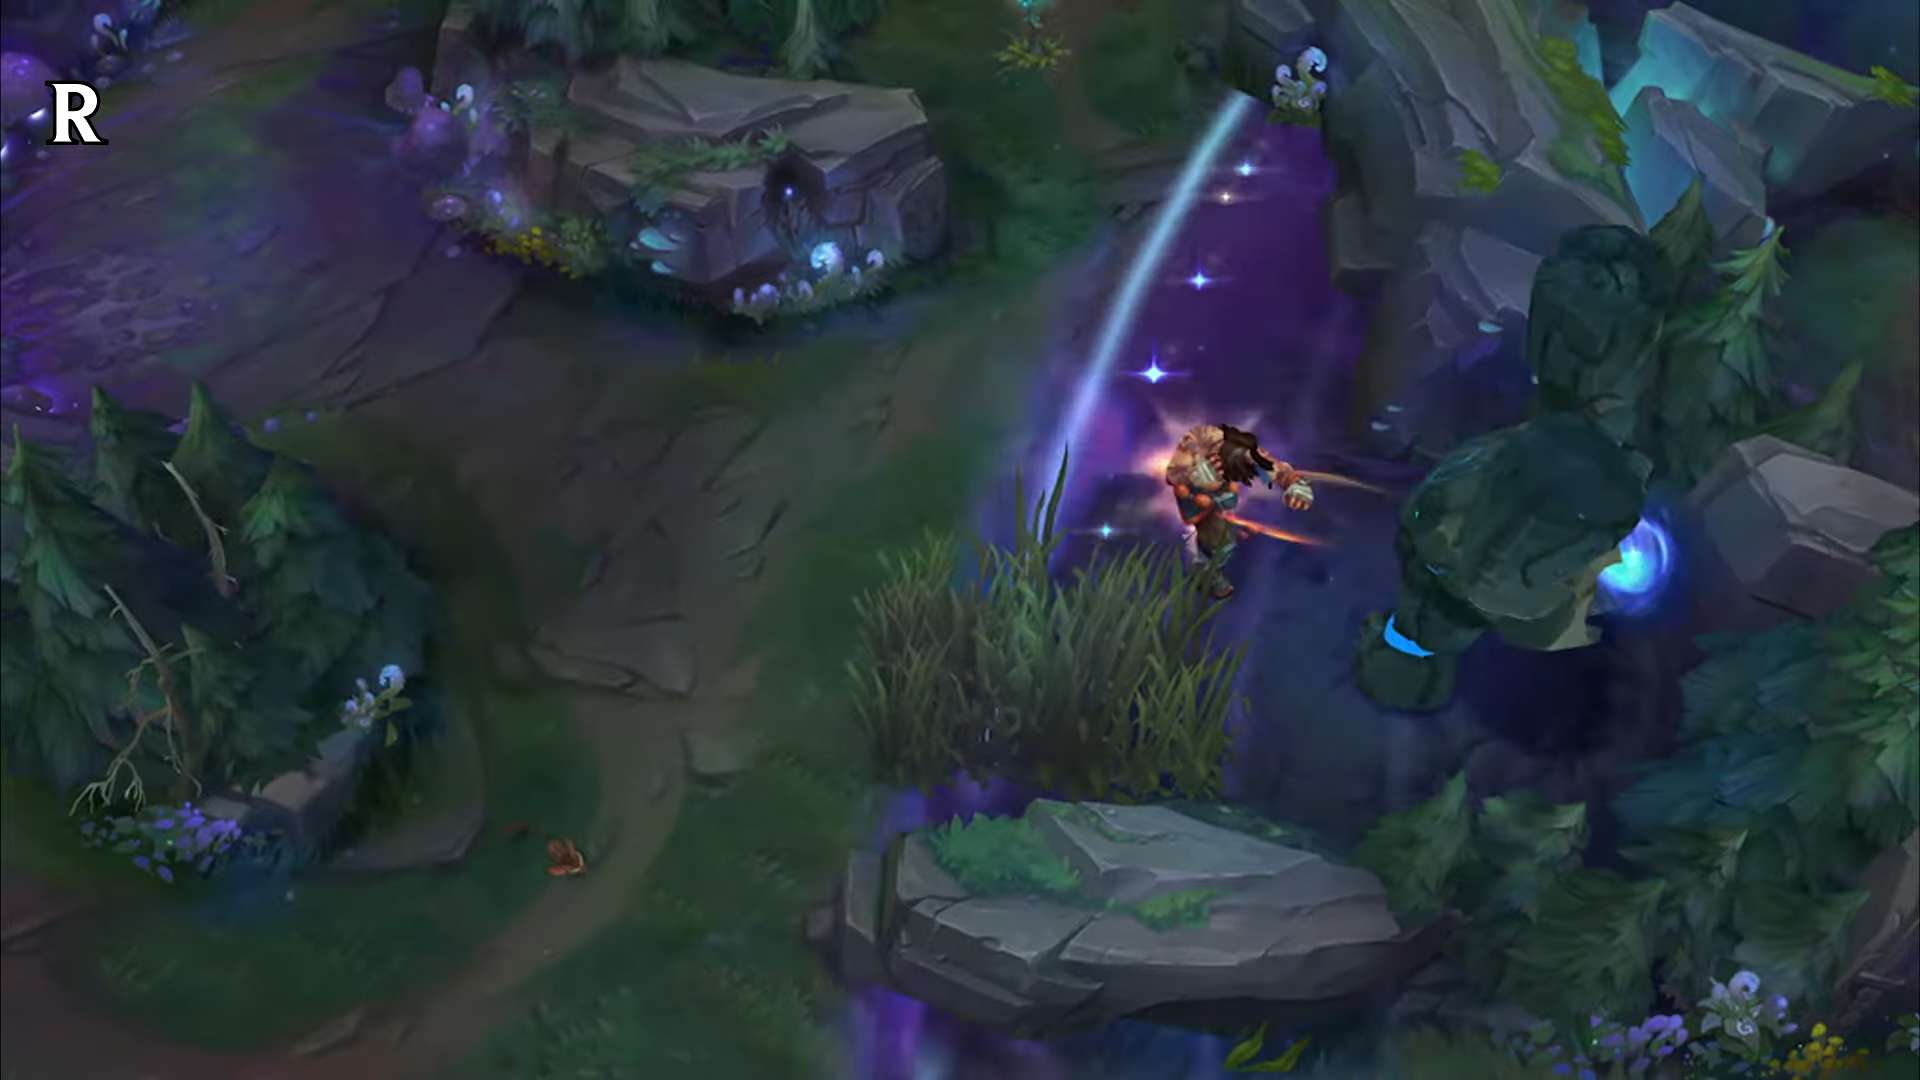 The aftershock wave of Aurelion Sol's ultimate has a special effect when it passes over Udyr.